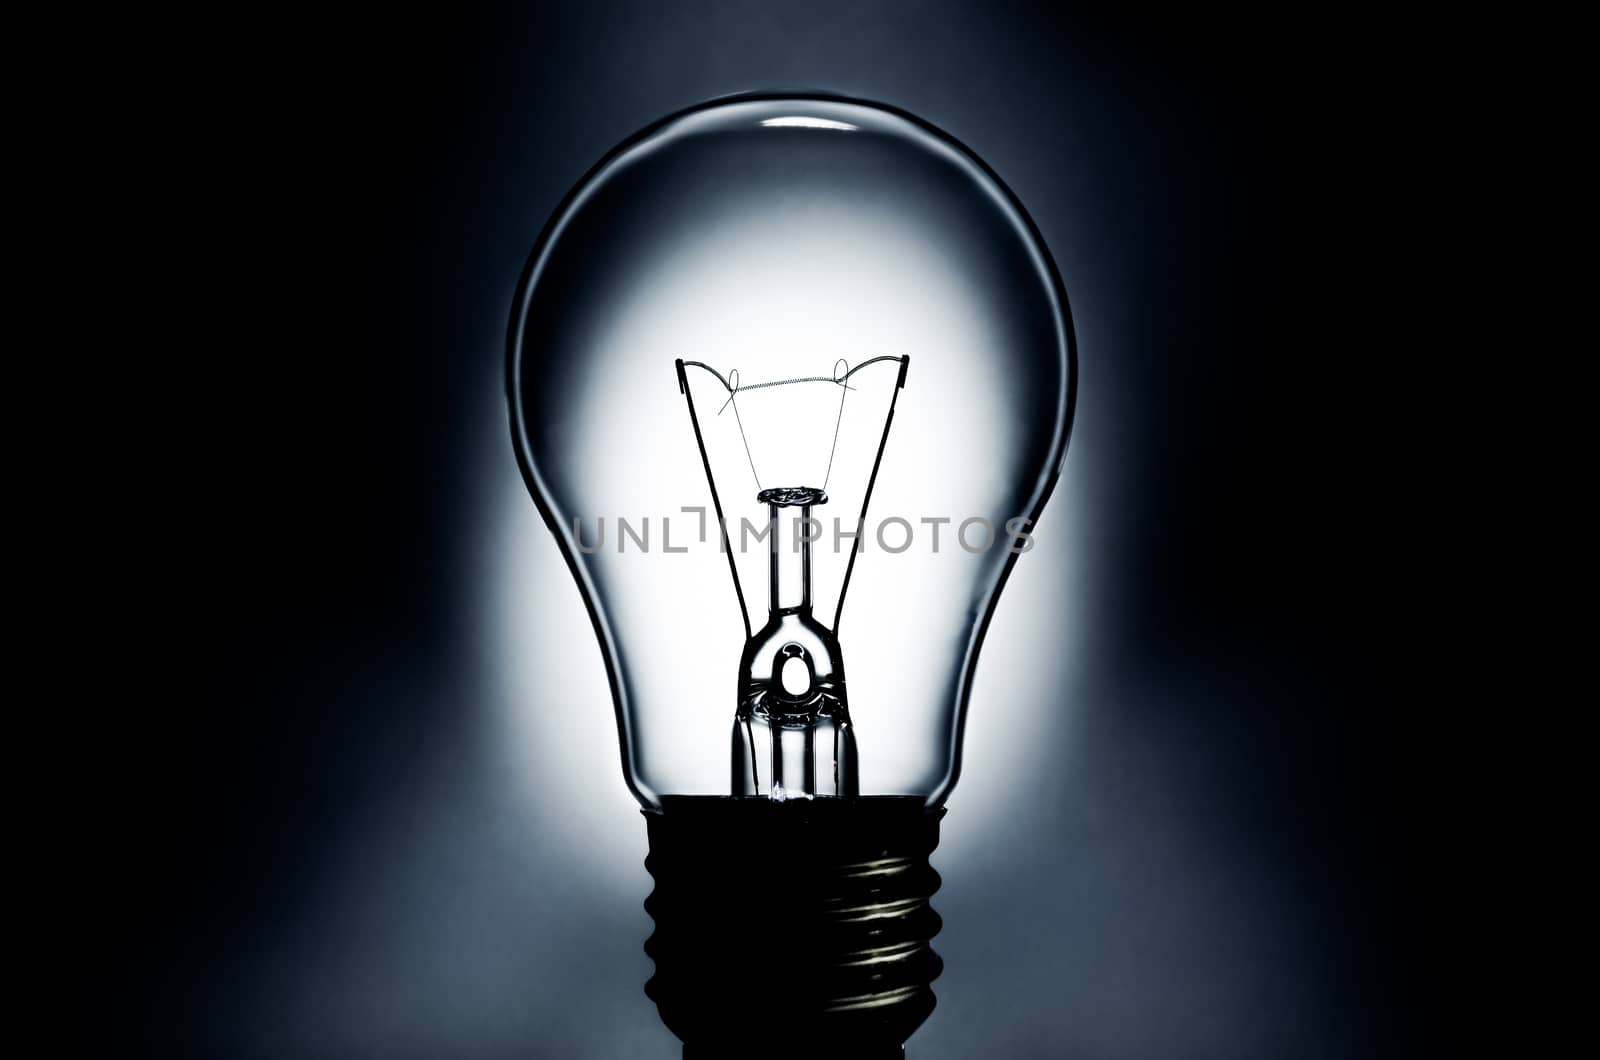 Electric light bulb with dark background by martinm303